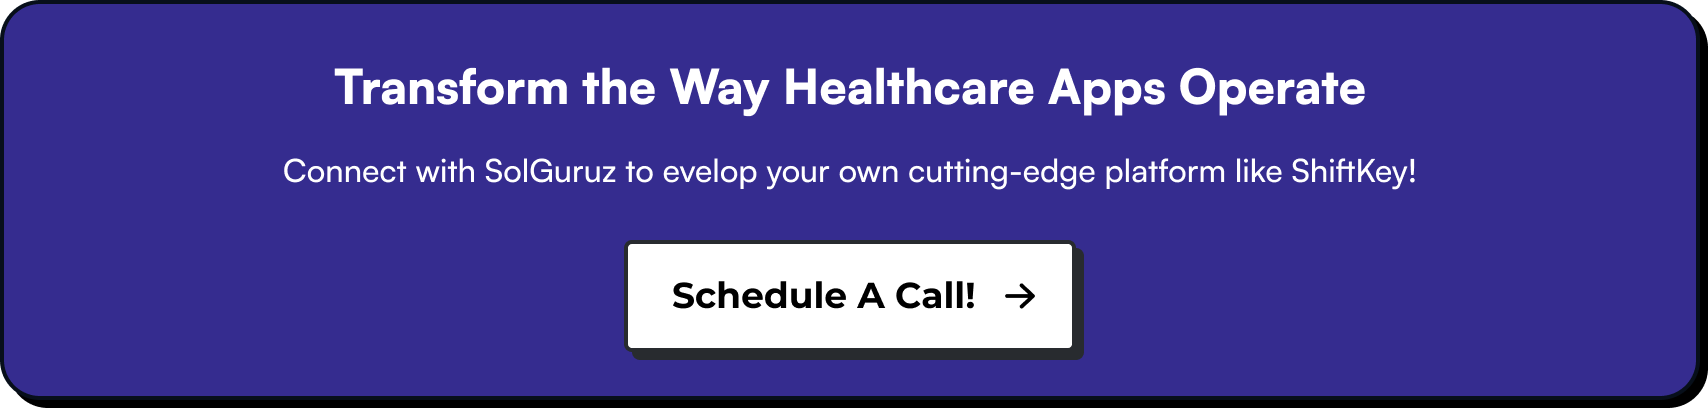 Transform the Way Healthcare Apps Operate Connect with SolGuruz to evelop your own cutting-edge platform like ShiftKey